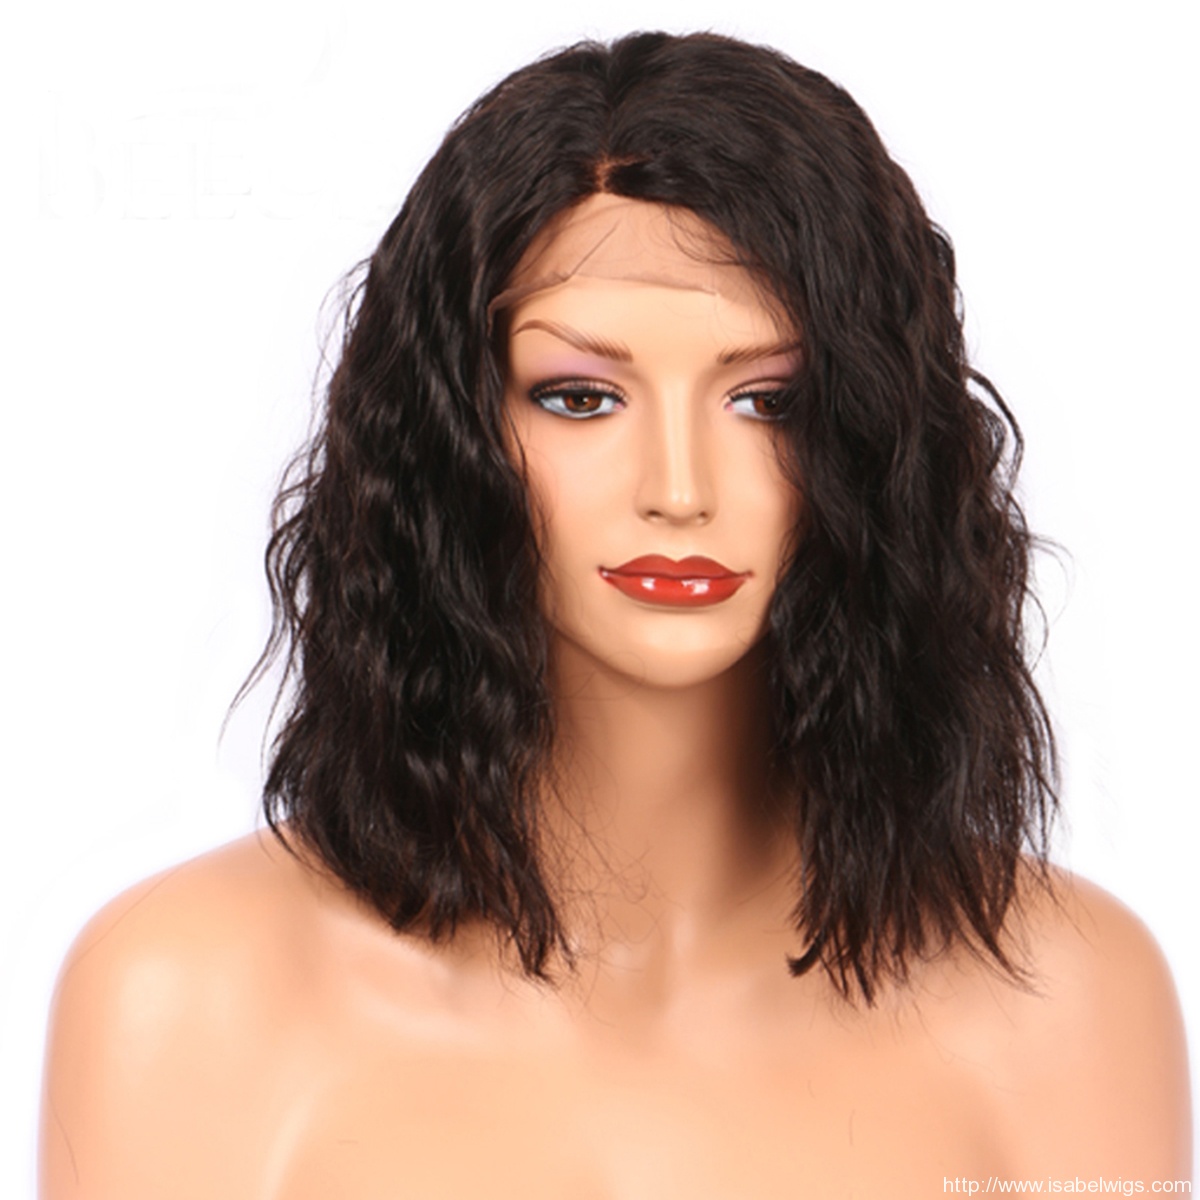 ISABEL Short Bob Full Lace Human Hair Wigs For Black Women,Wavy Short Cut Human Hair Wigs With Baby Hair